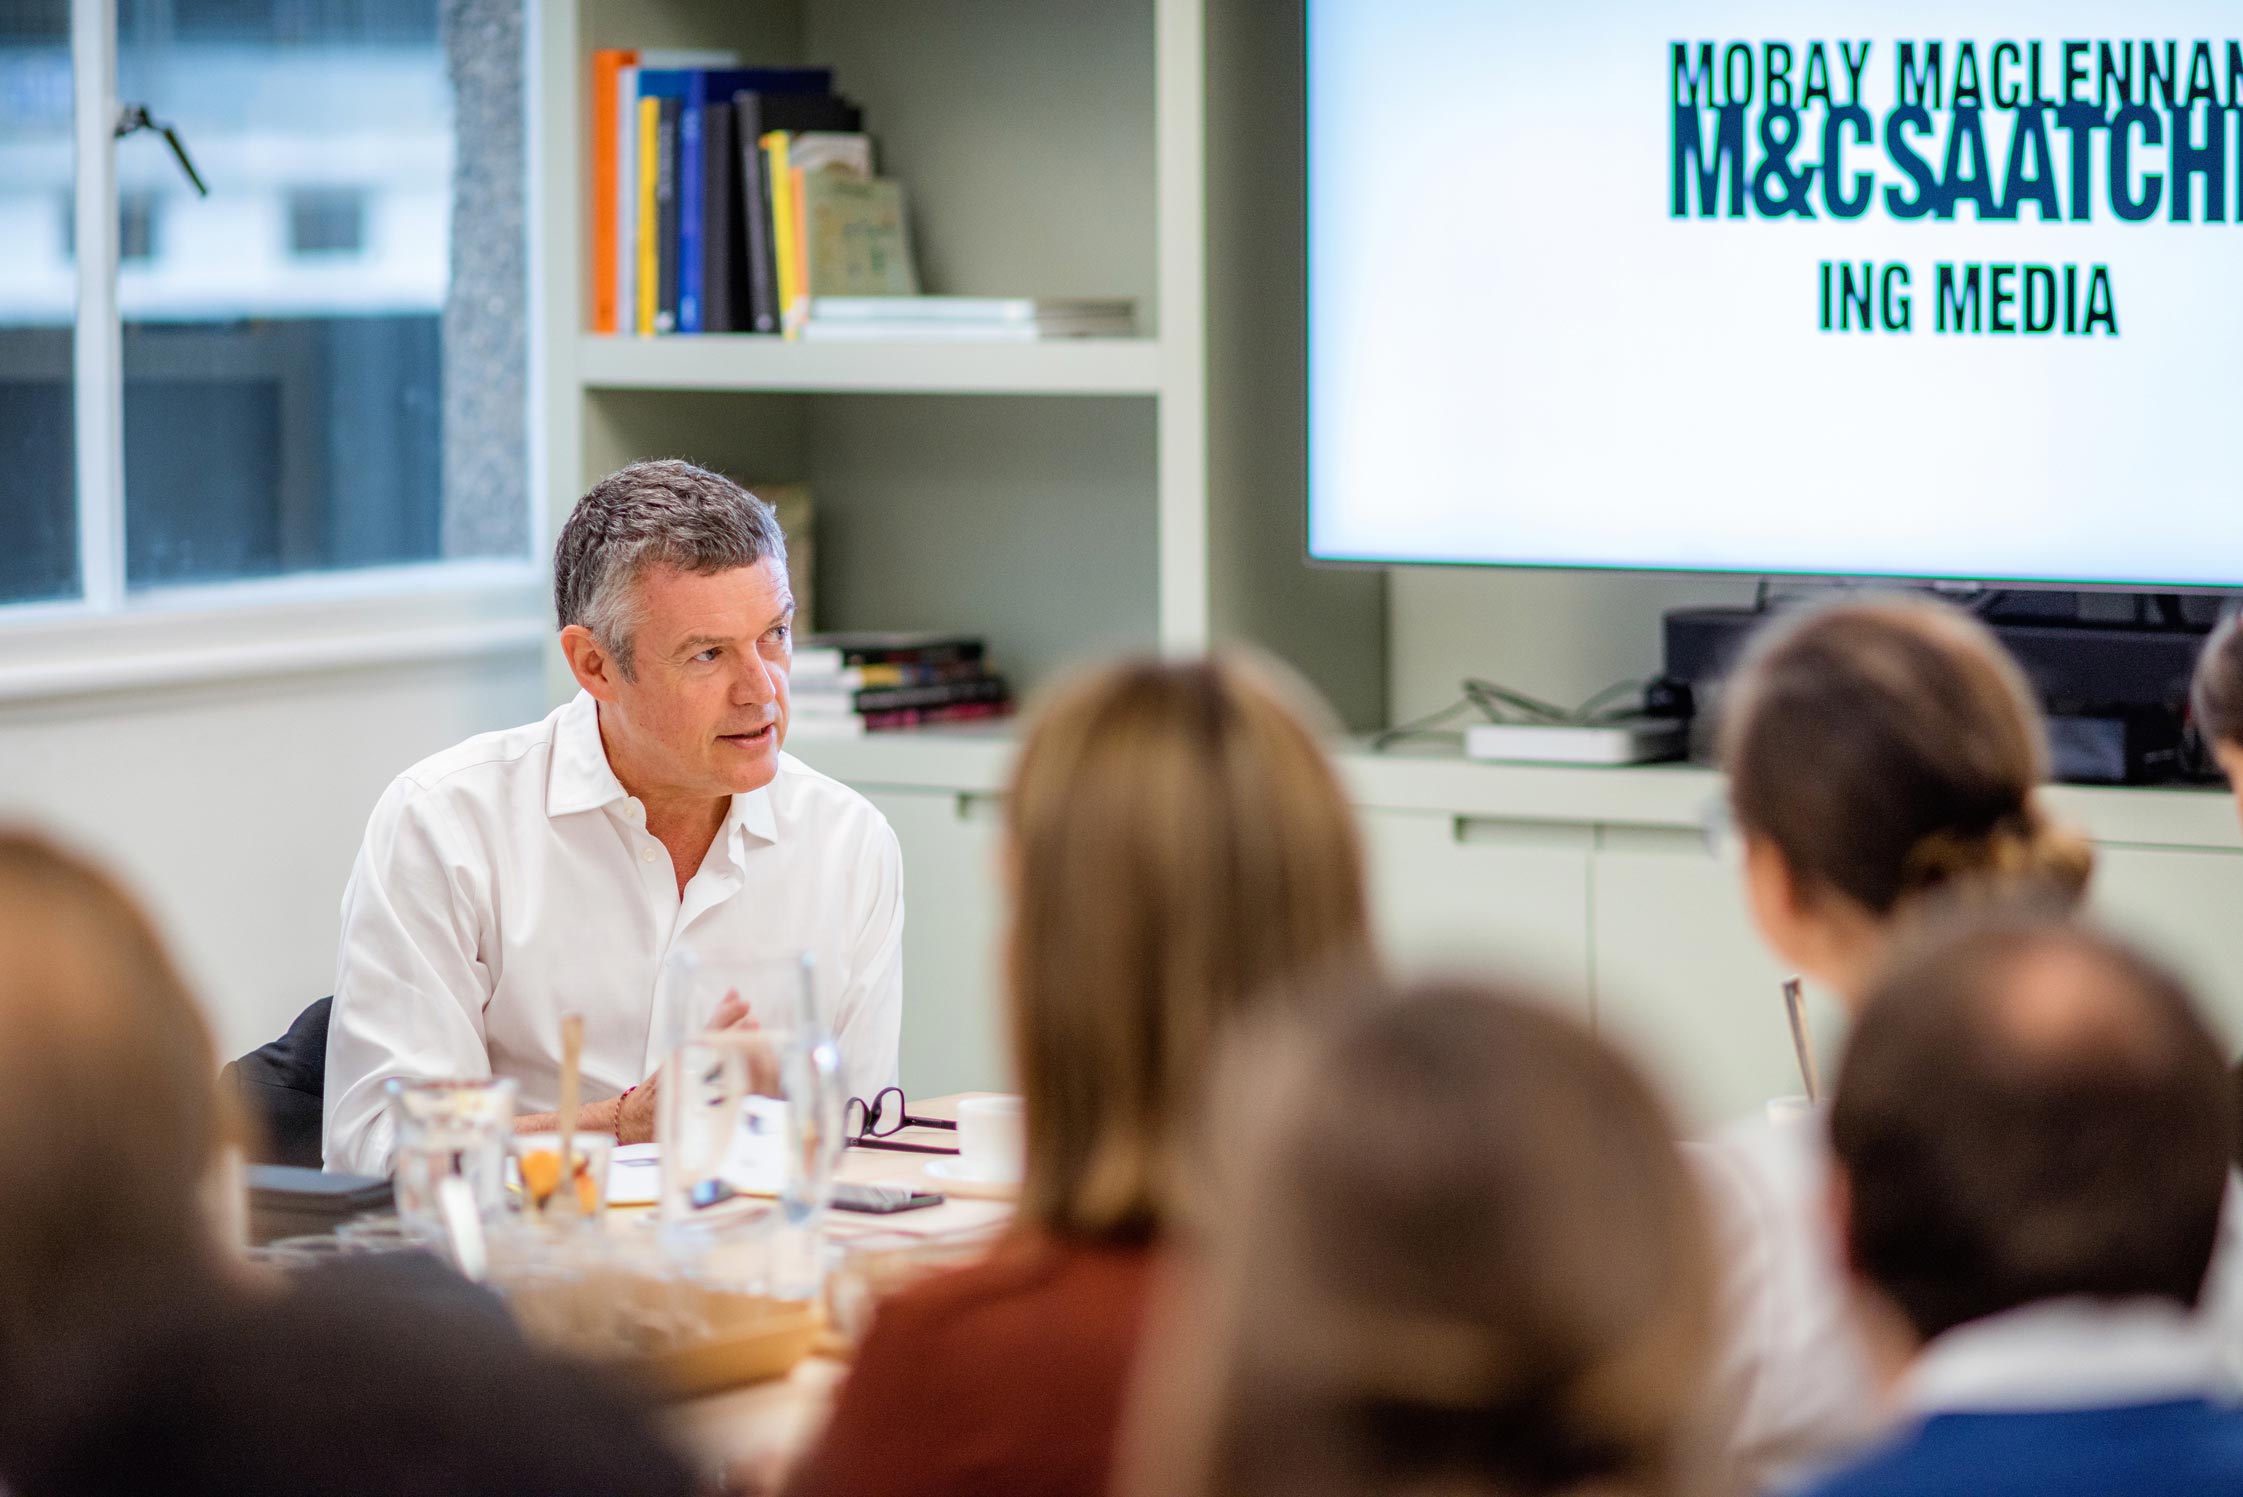 Moray MacLennan from M&C Saatchi Group gives a talk to an office full of professionals in this lifestyle office picture, shot in reportage style by Wright Content.